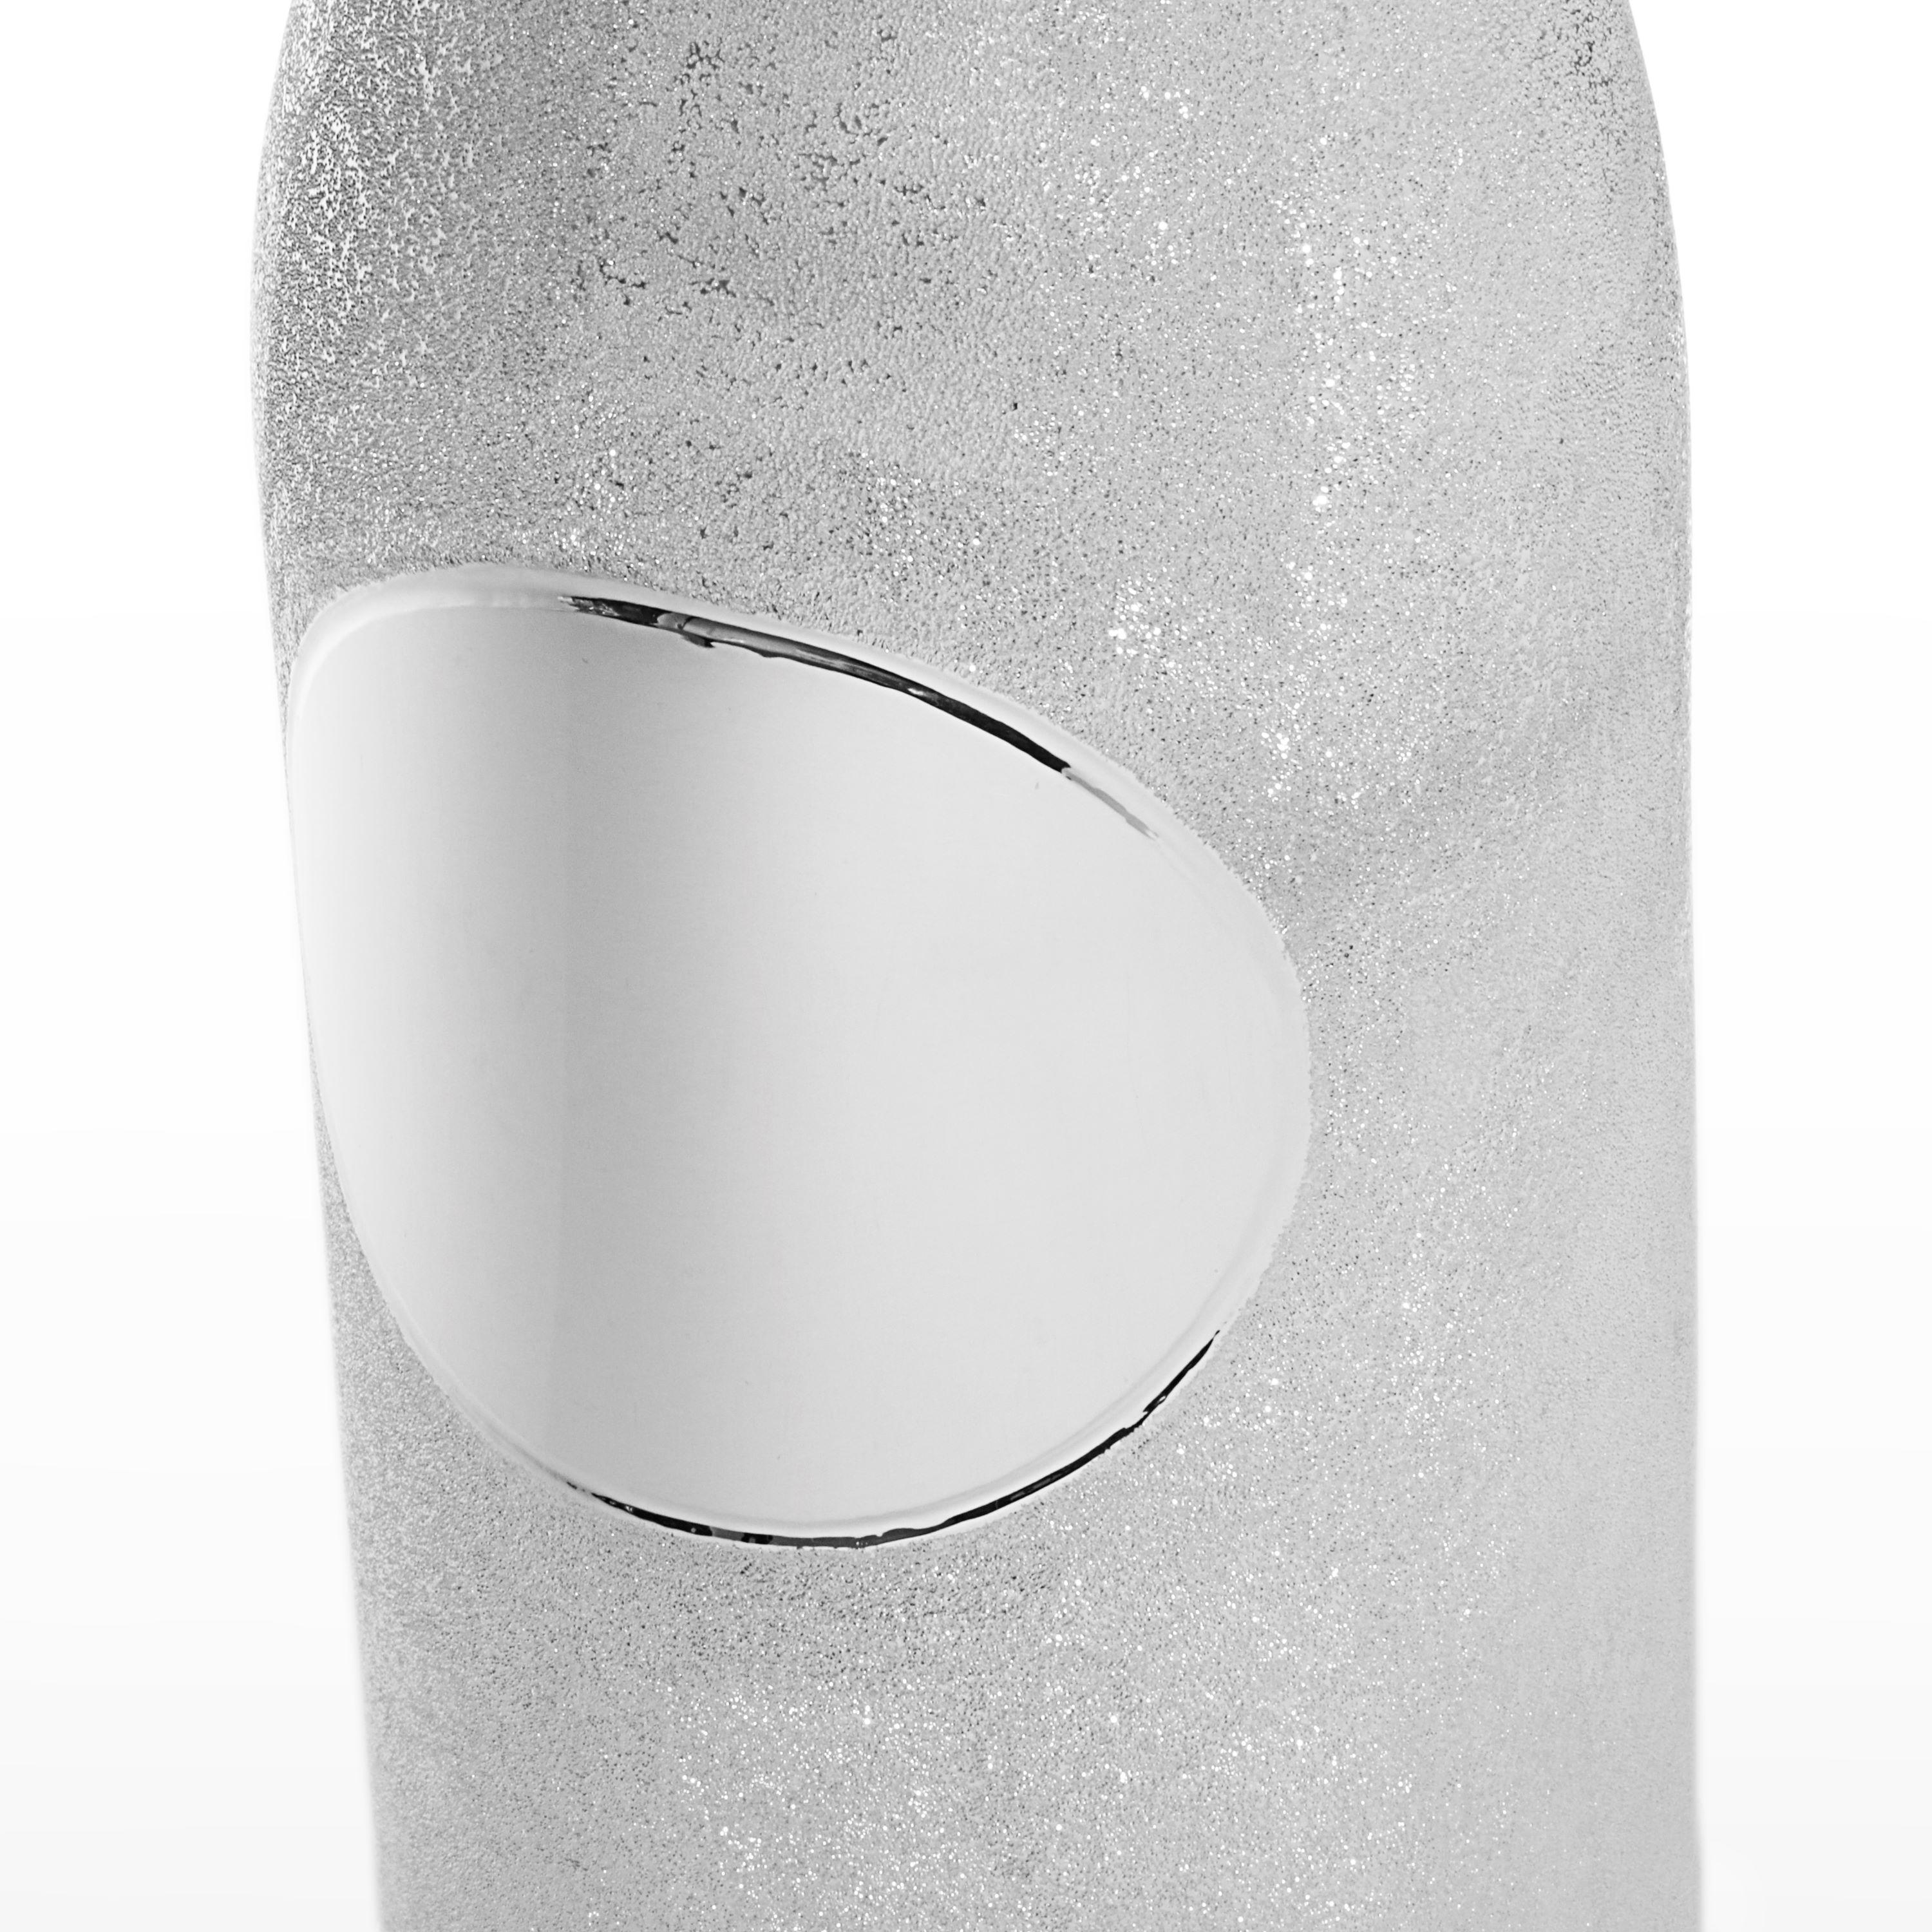 YOUR MOON :
Our K-OVERs, are alternatives to the champagne bucket and the more common glacette.  The precious metal that holds the bottle is coated internally with a thermal fabric that maintains the temperature of your champagne for about 2 hours.